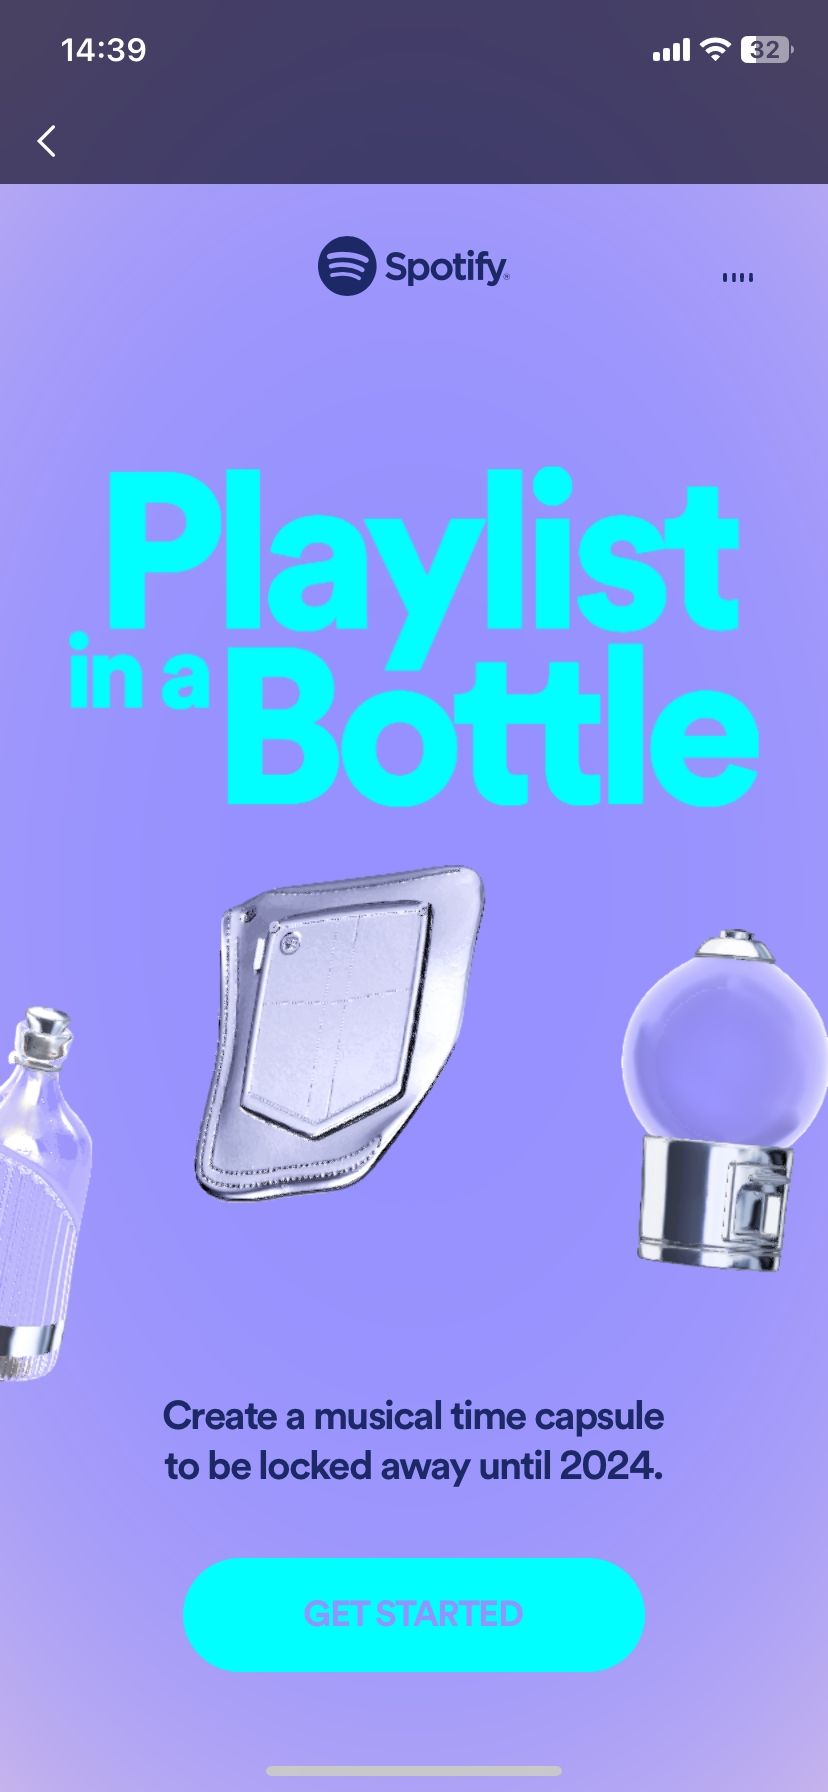 How to Create a Spotify Playlist In a Bottle to Open in 2024